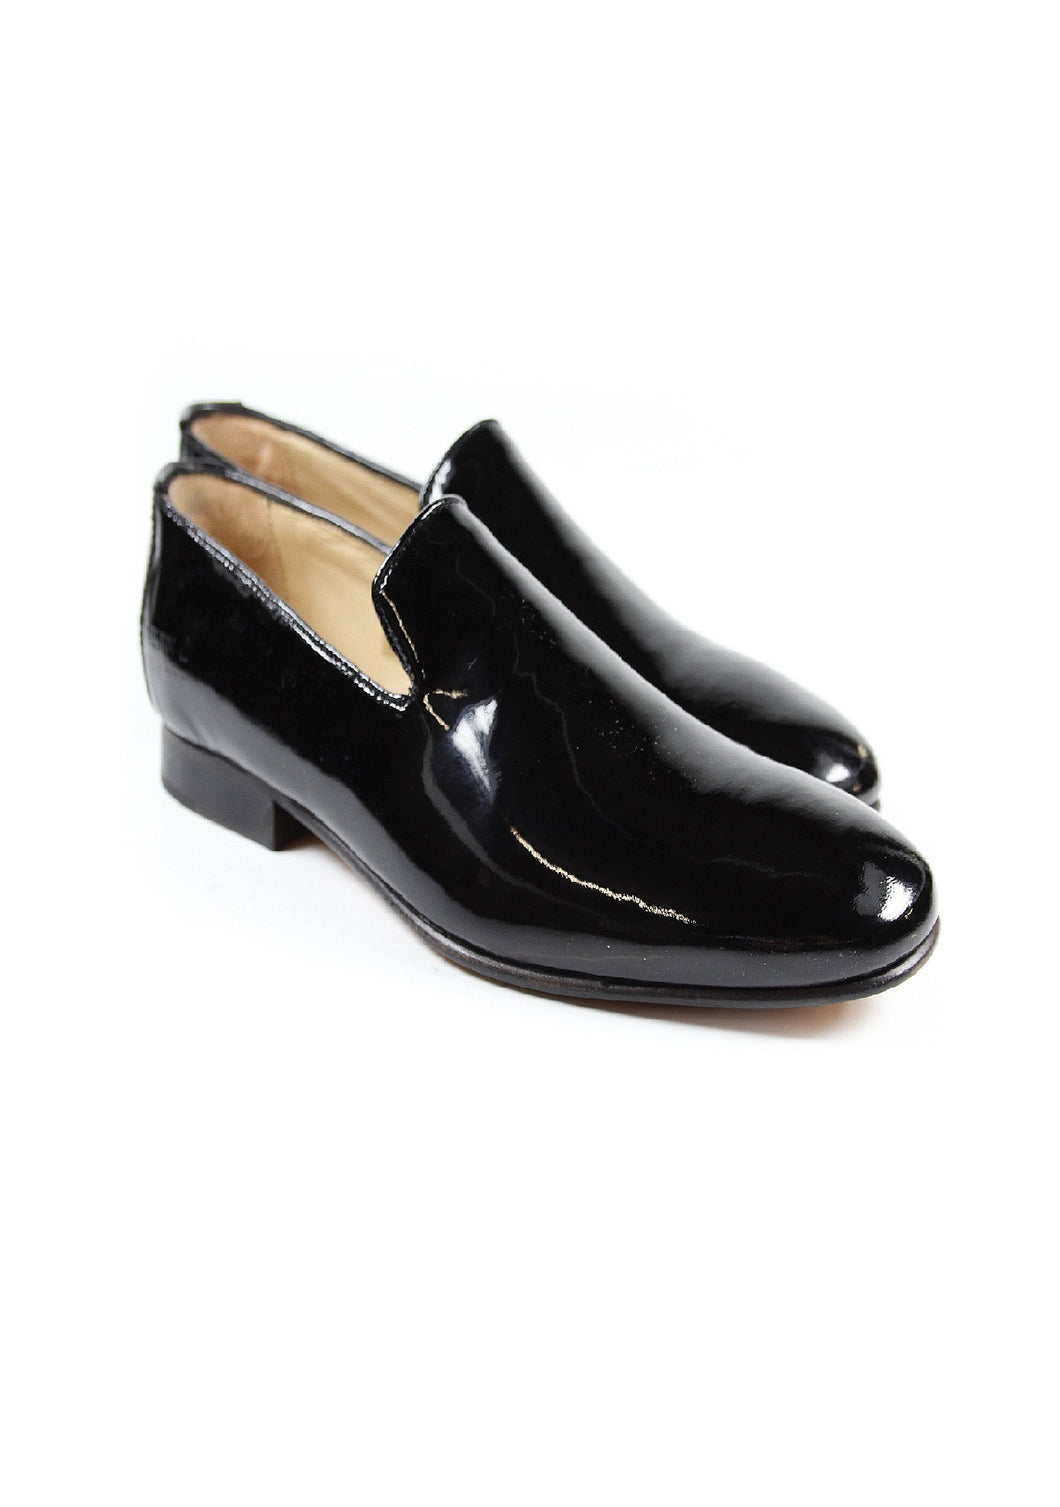 Pure patent leather shoes for men